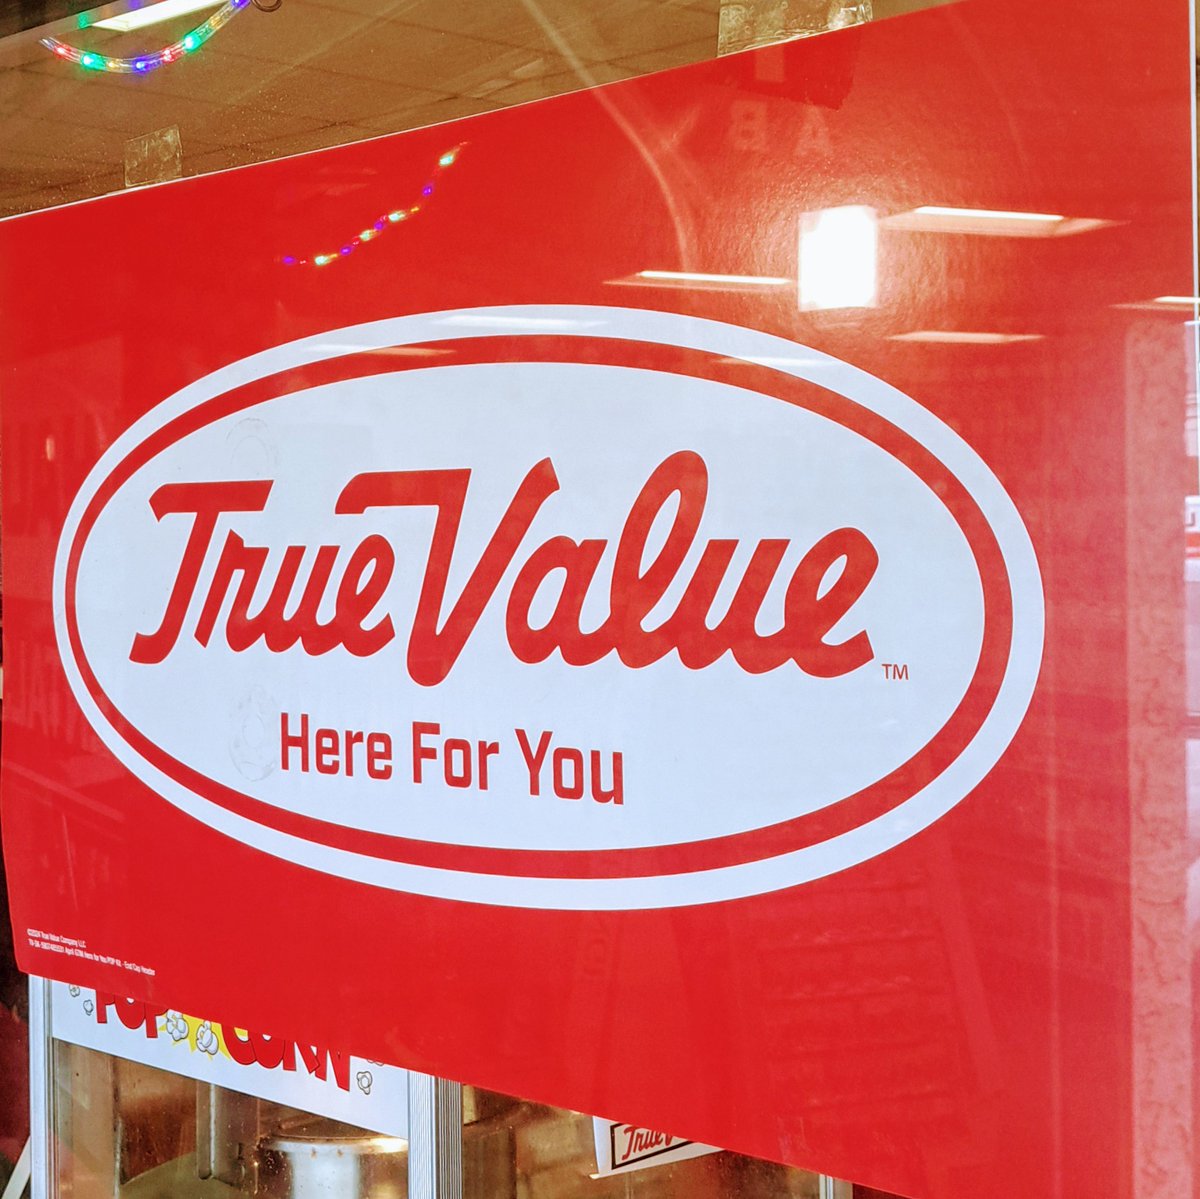 New @truevalue signage arrived! 'Here For You' is the new #HappyToHelp =D 

#tulsaok #localfirst #shoplocal